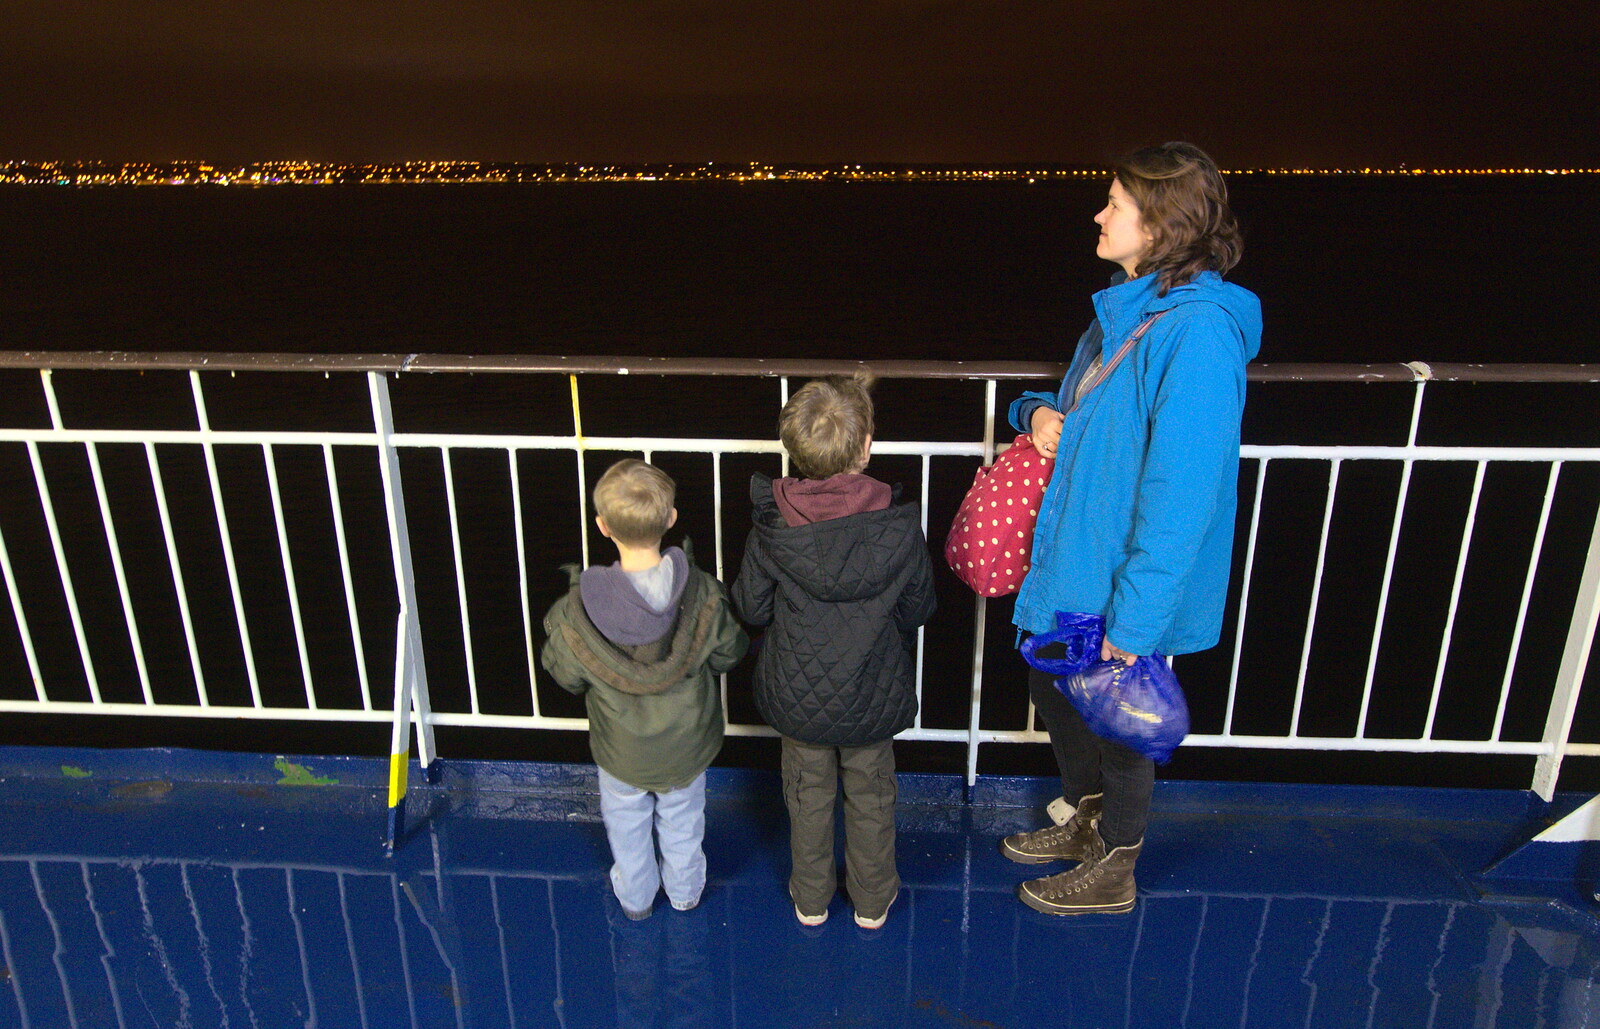 Harry, Fred and Isobel watch Dublin's lights from Conwy, Holyhead and the Ferry to Ireland - 21st December 2015